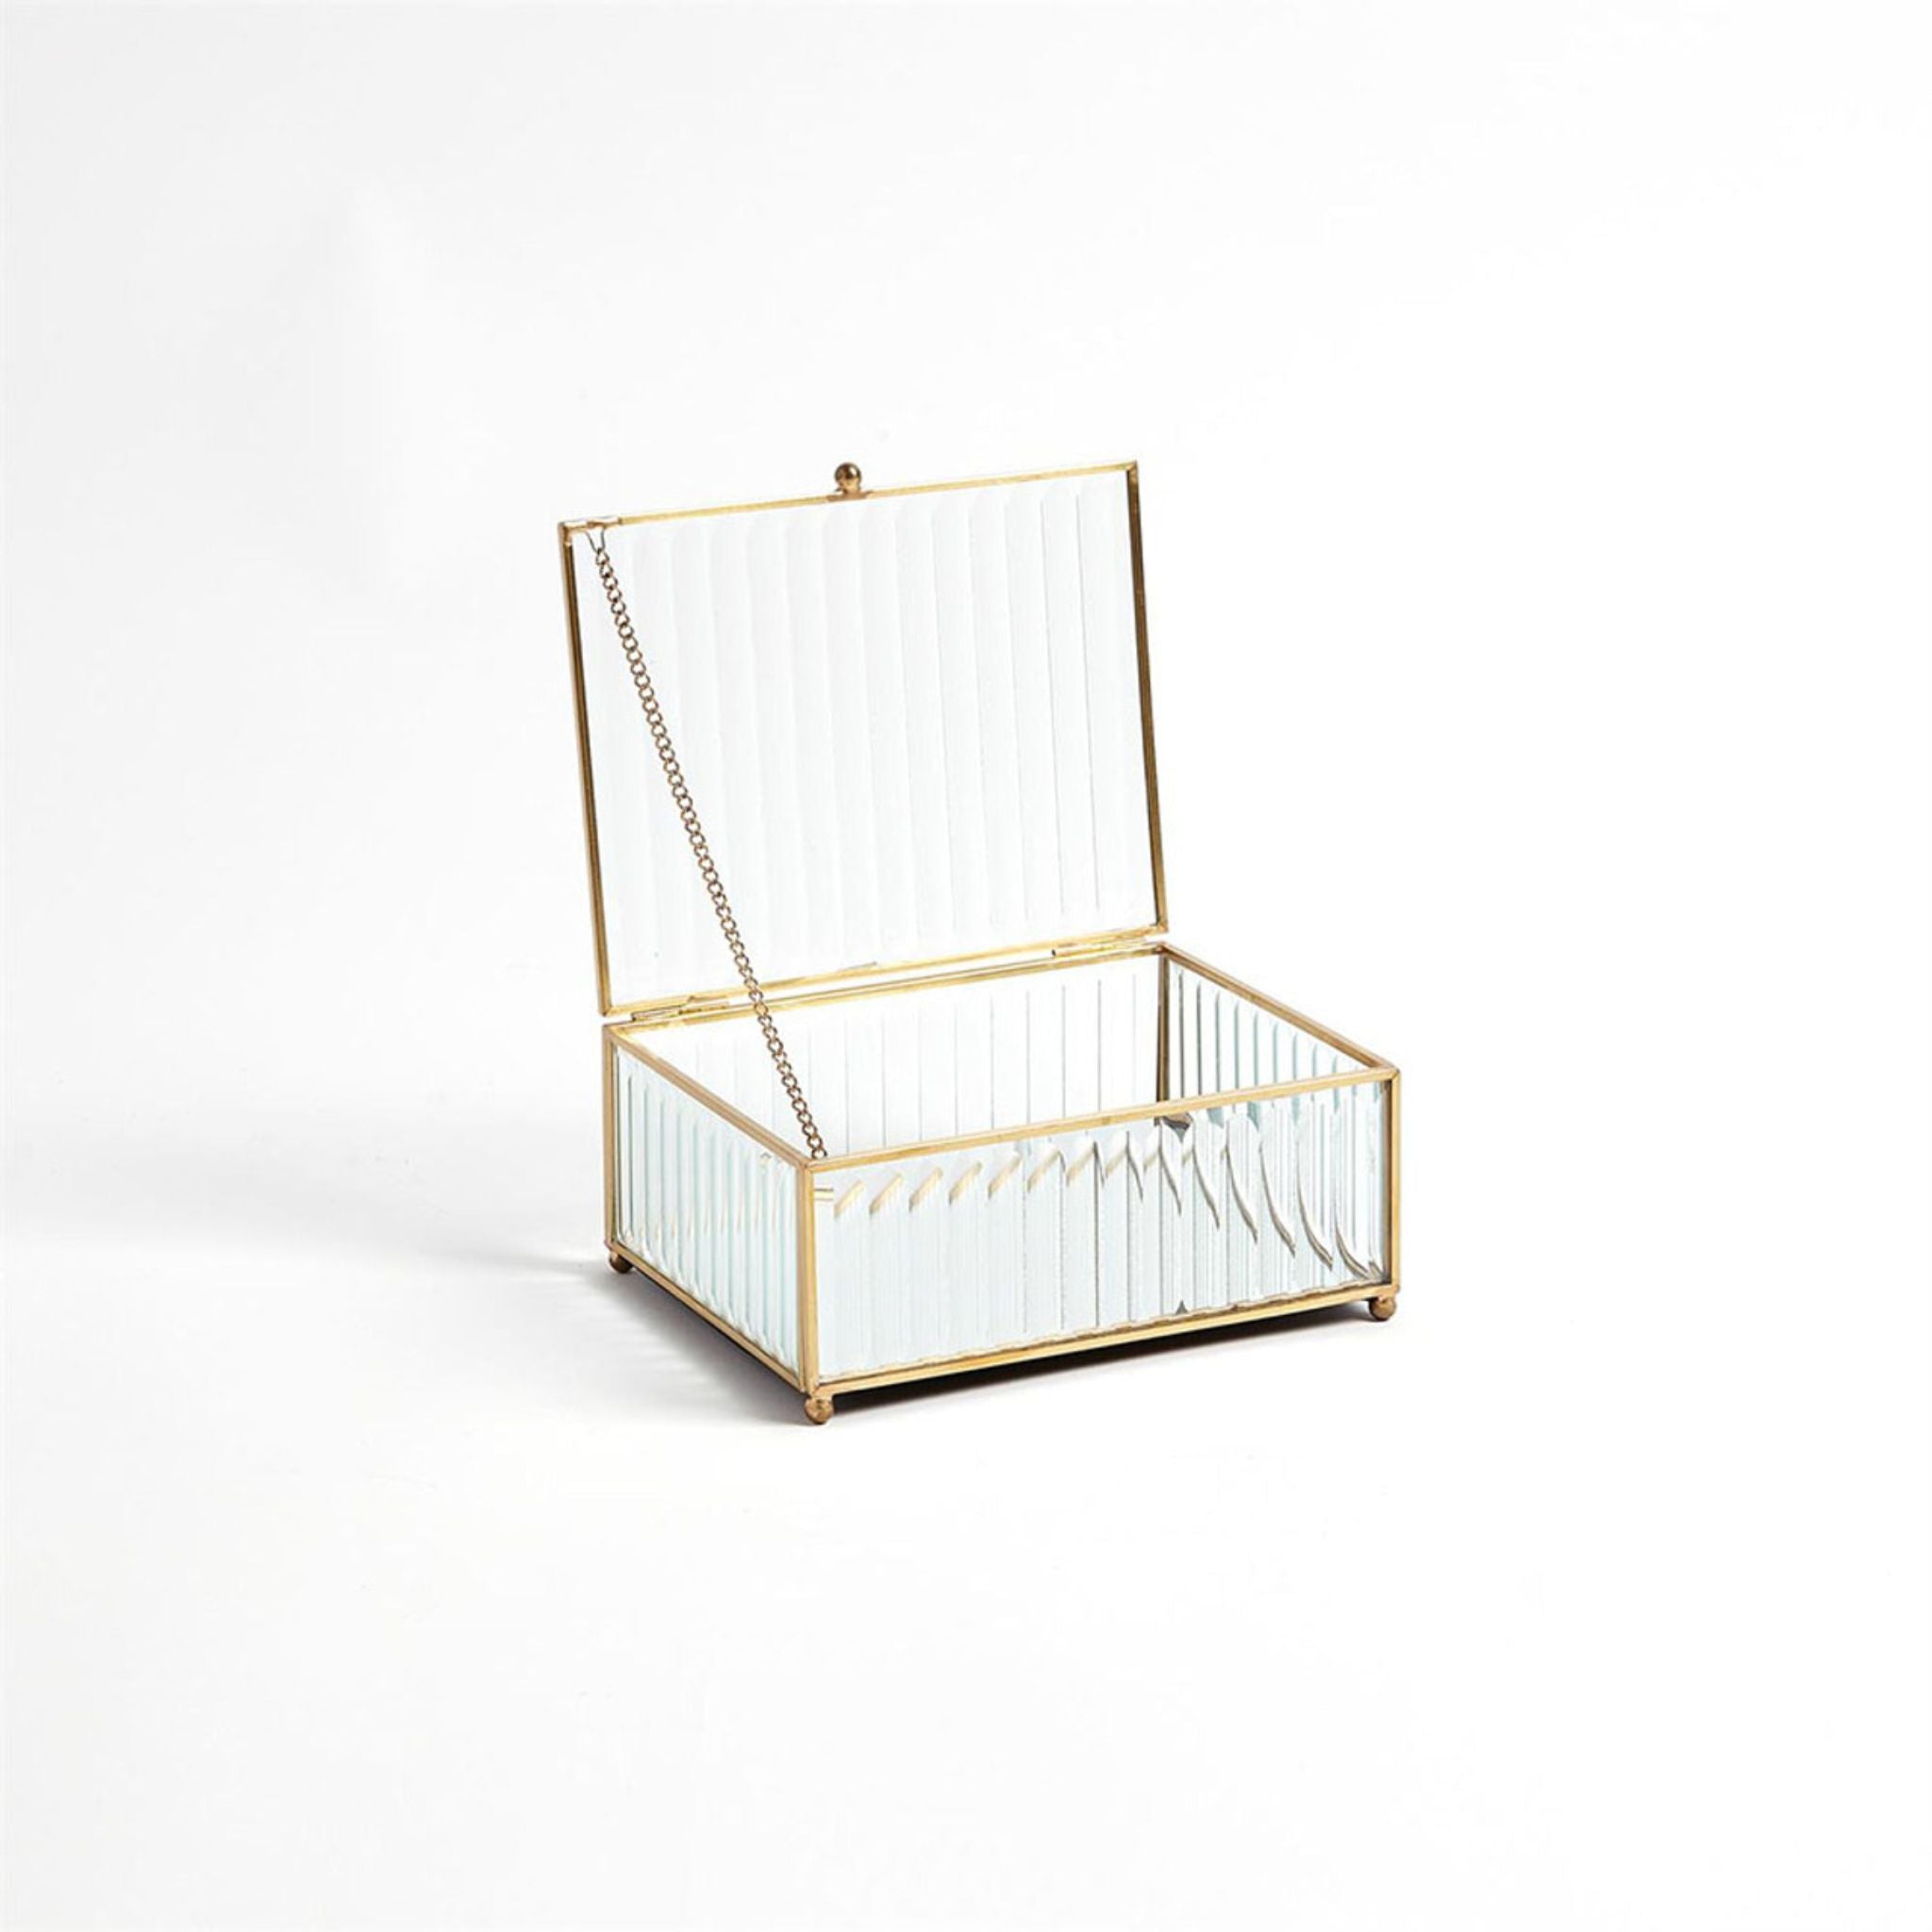 REEDED GLASS BOX